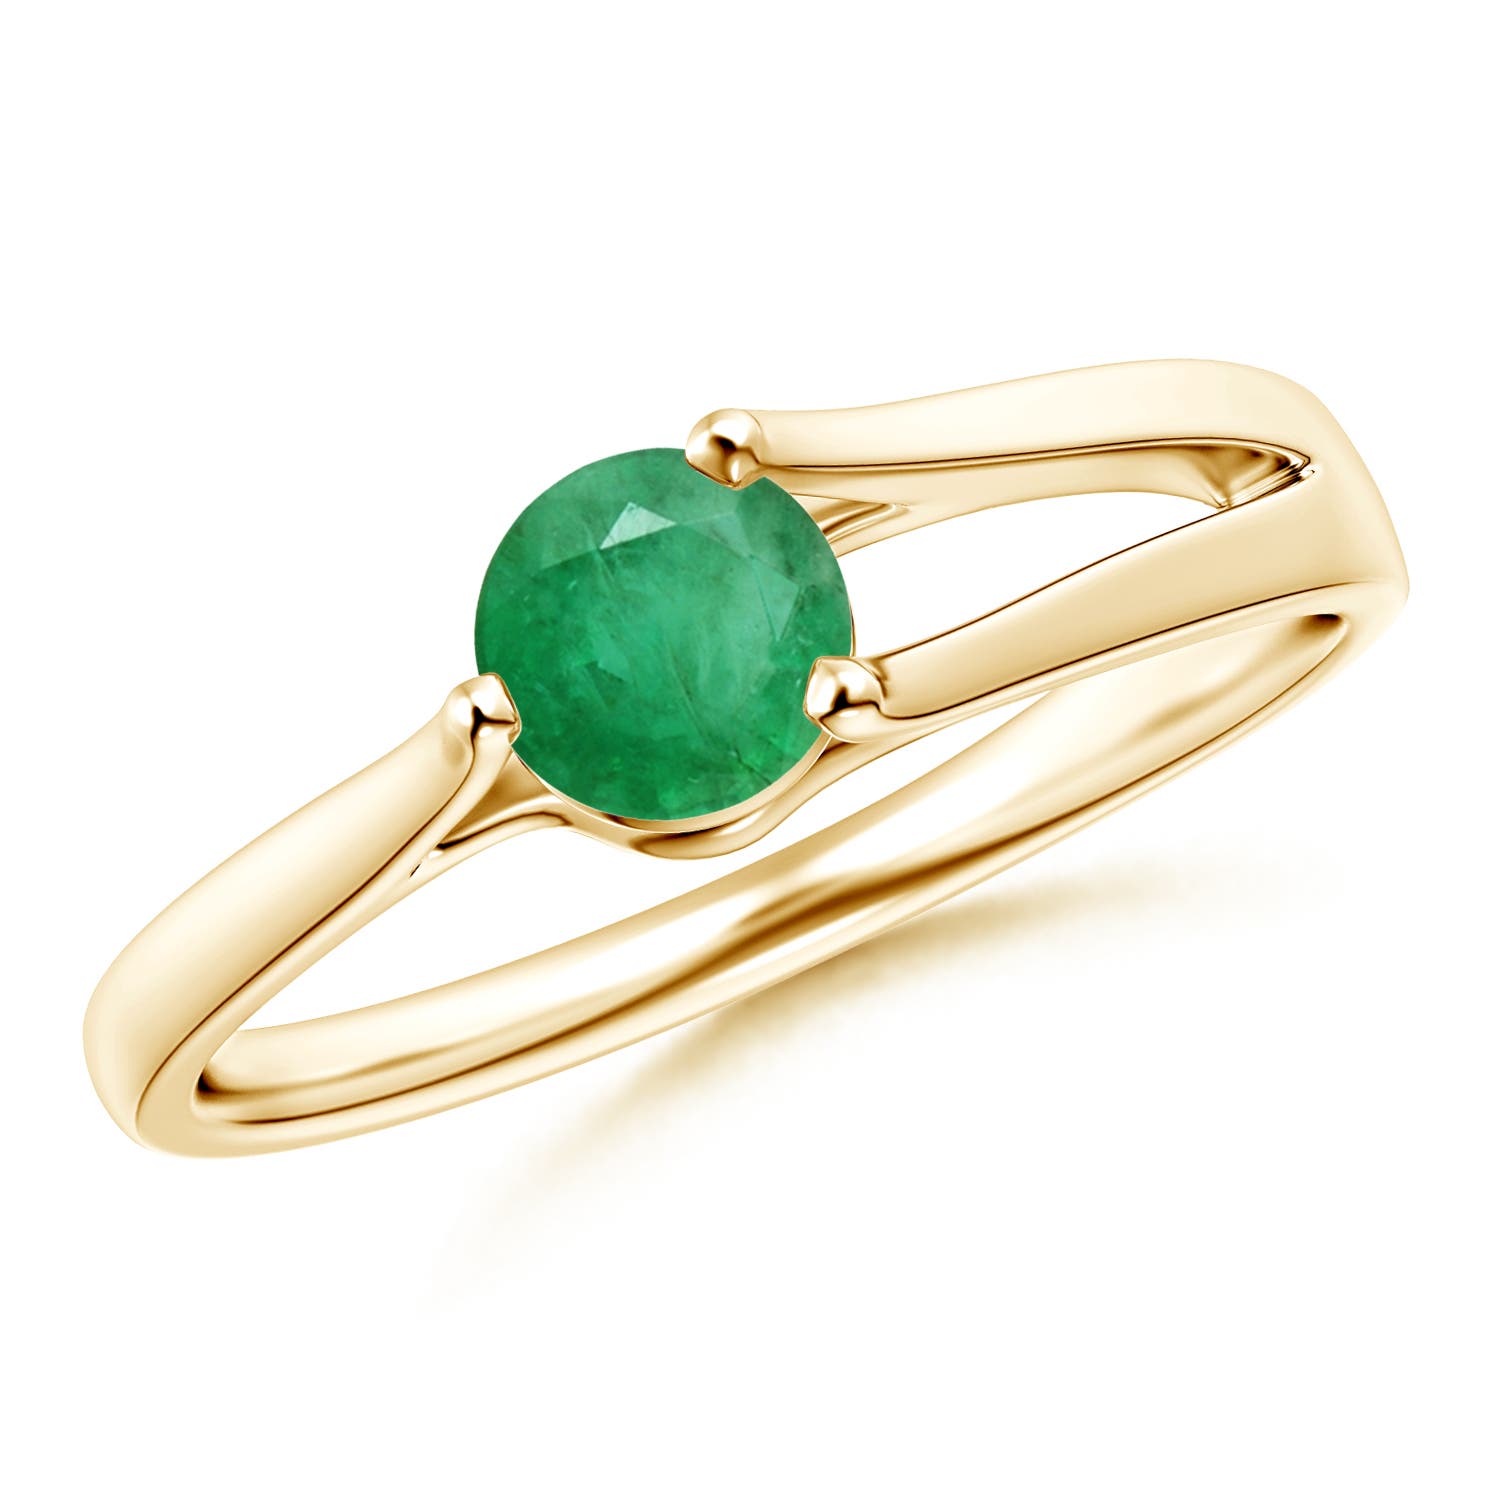 A - Emerald / 0.45 CT / 14 KT Yellow Gold